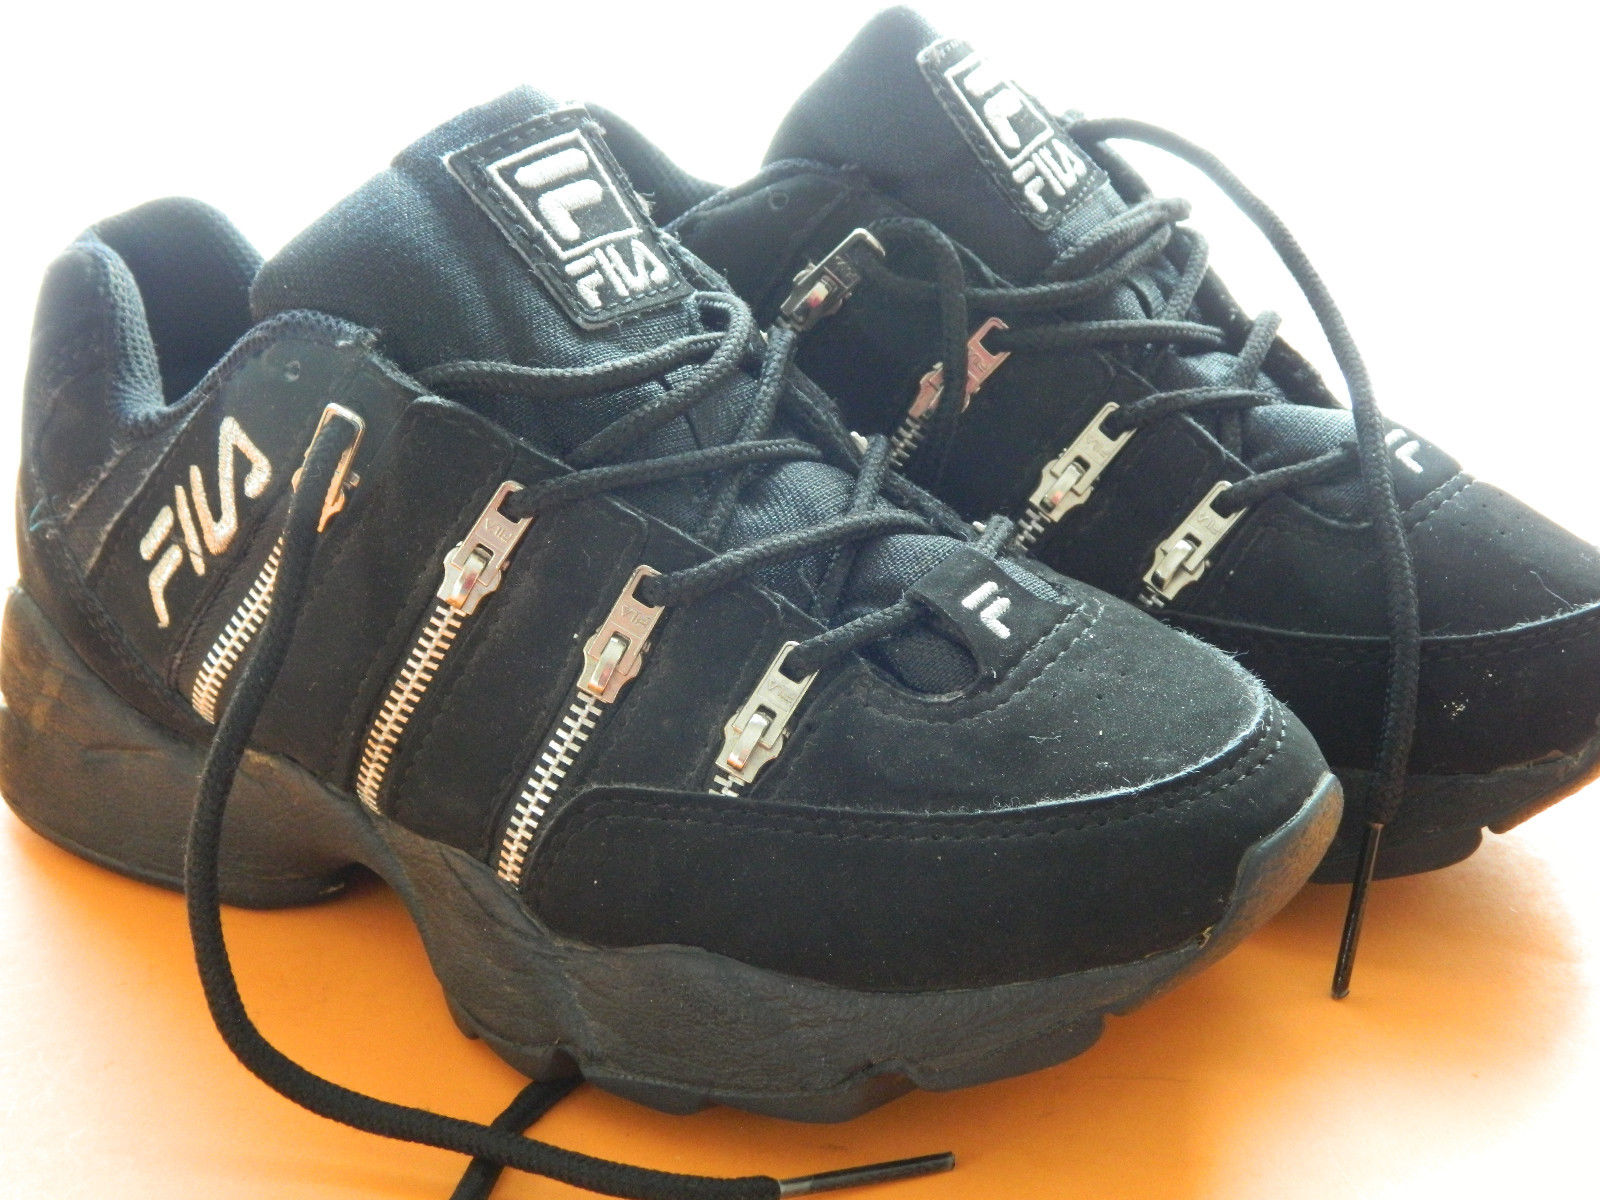 Vintage: Sneaker Trends Of The '90s - The Snobette